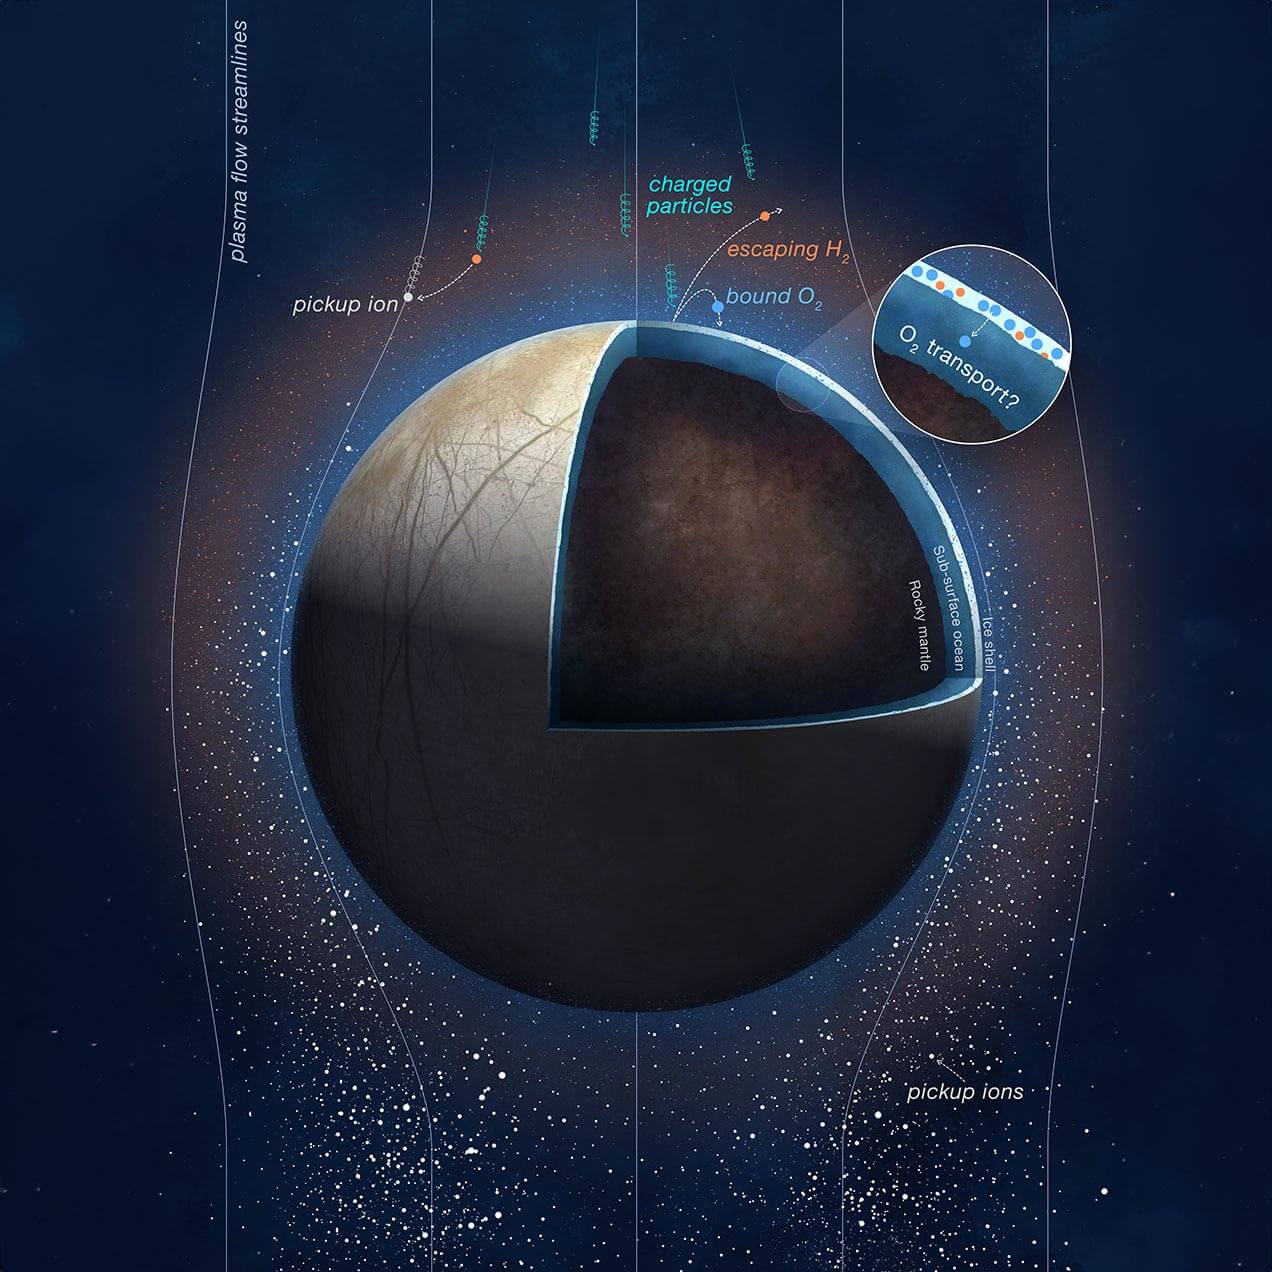 This illustration shows charged particles from Jupiter hitting the face of Europa, separating icy water molecules into hydrogen and oxygen molecules. The scientists believe that some of these newly formed oxygen gases can move into the moon's subsurface ocean, as the circled figure shows. Credit: NASA/JPL-Caltech/SWRI/PU